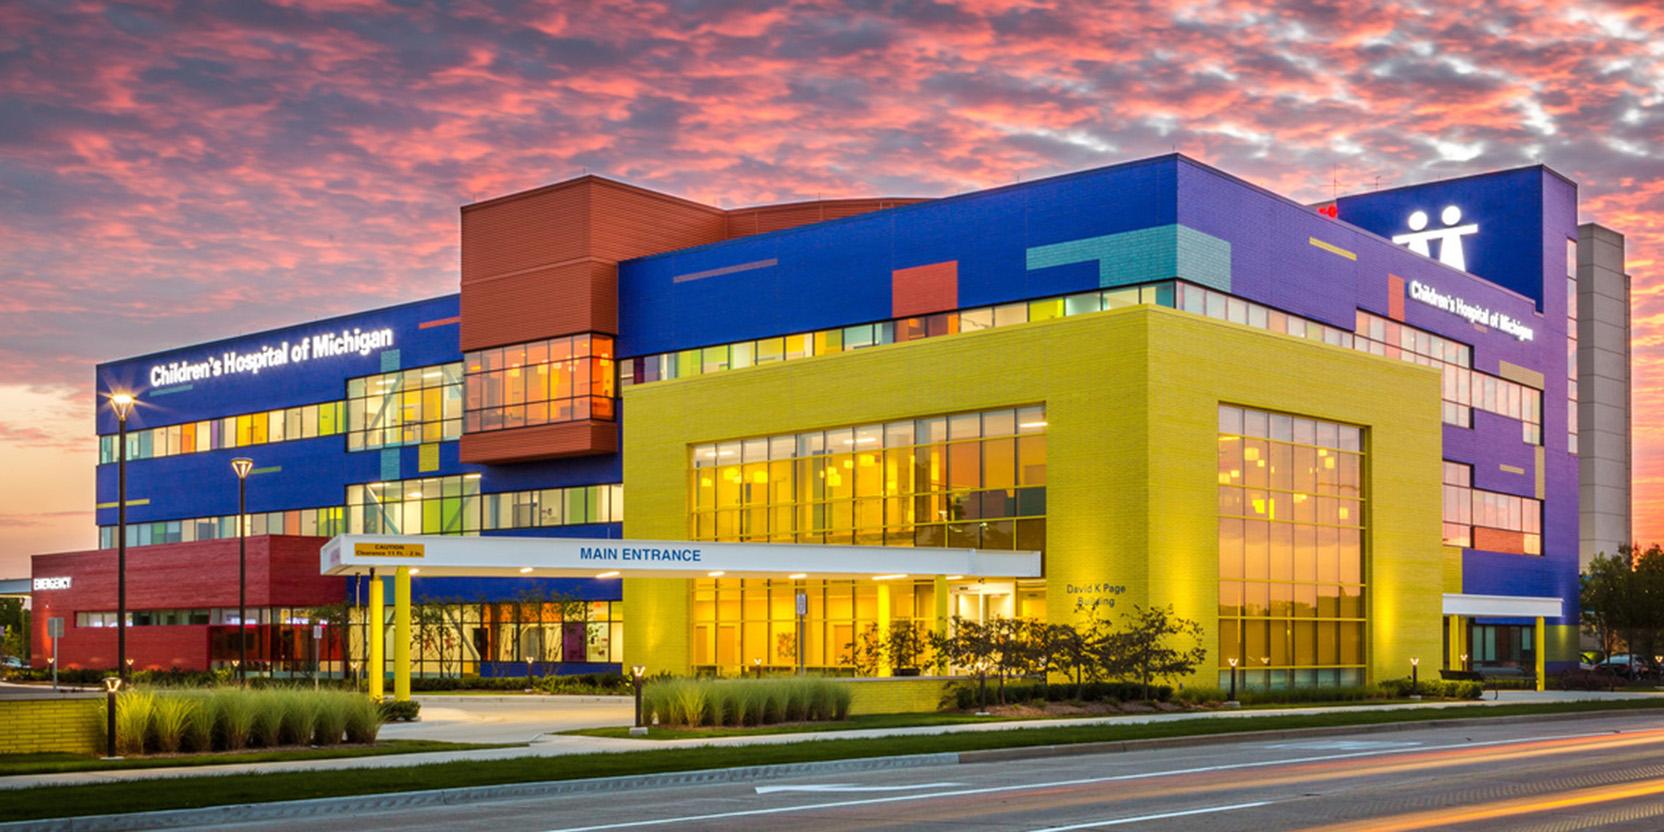 A children’s hospital inspired by building blocks.